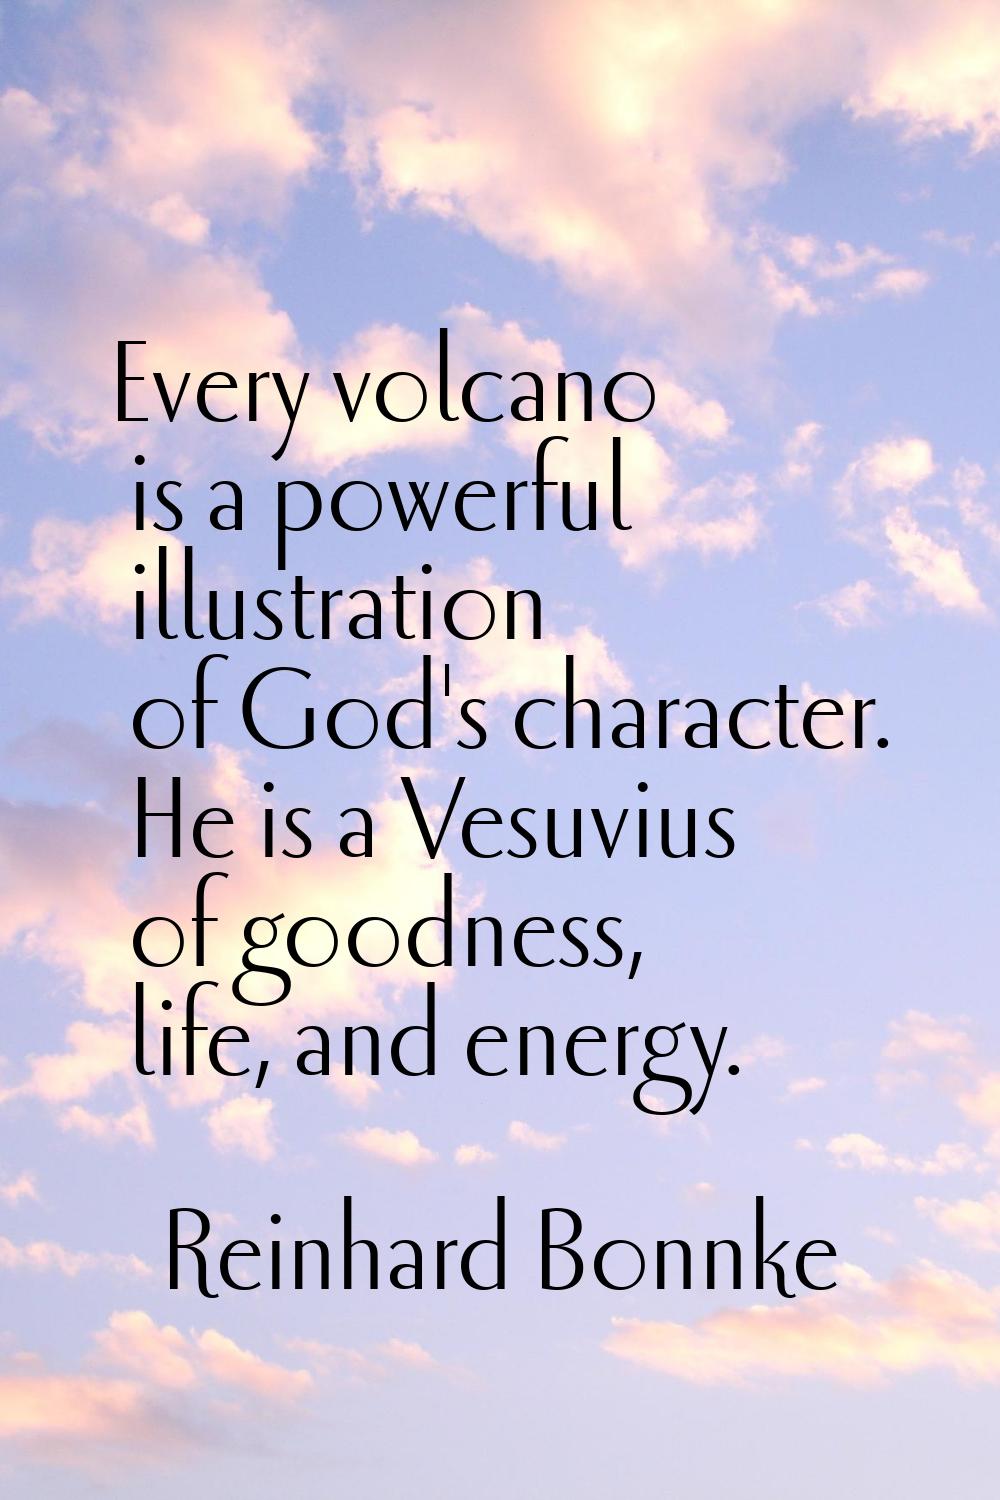 Every volcano is a powerful illustration of God's character. He is a Vesuvius of goodness, life, an